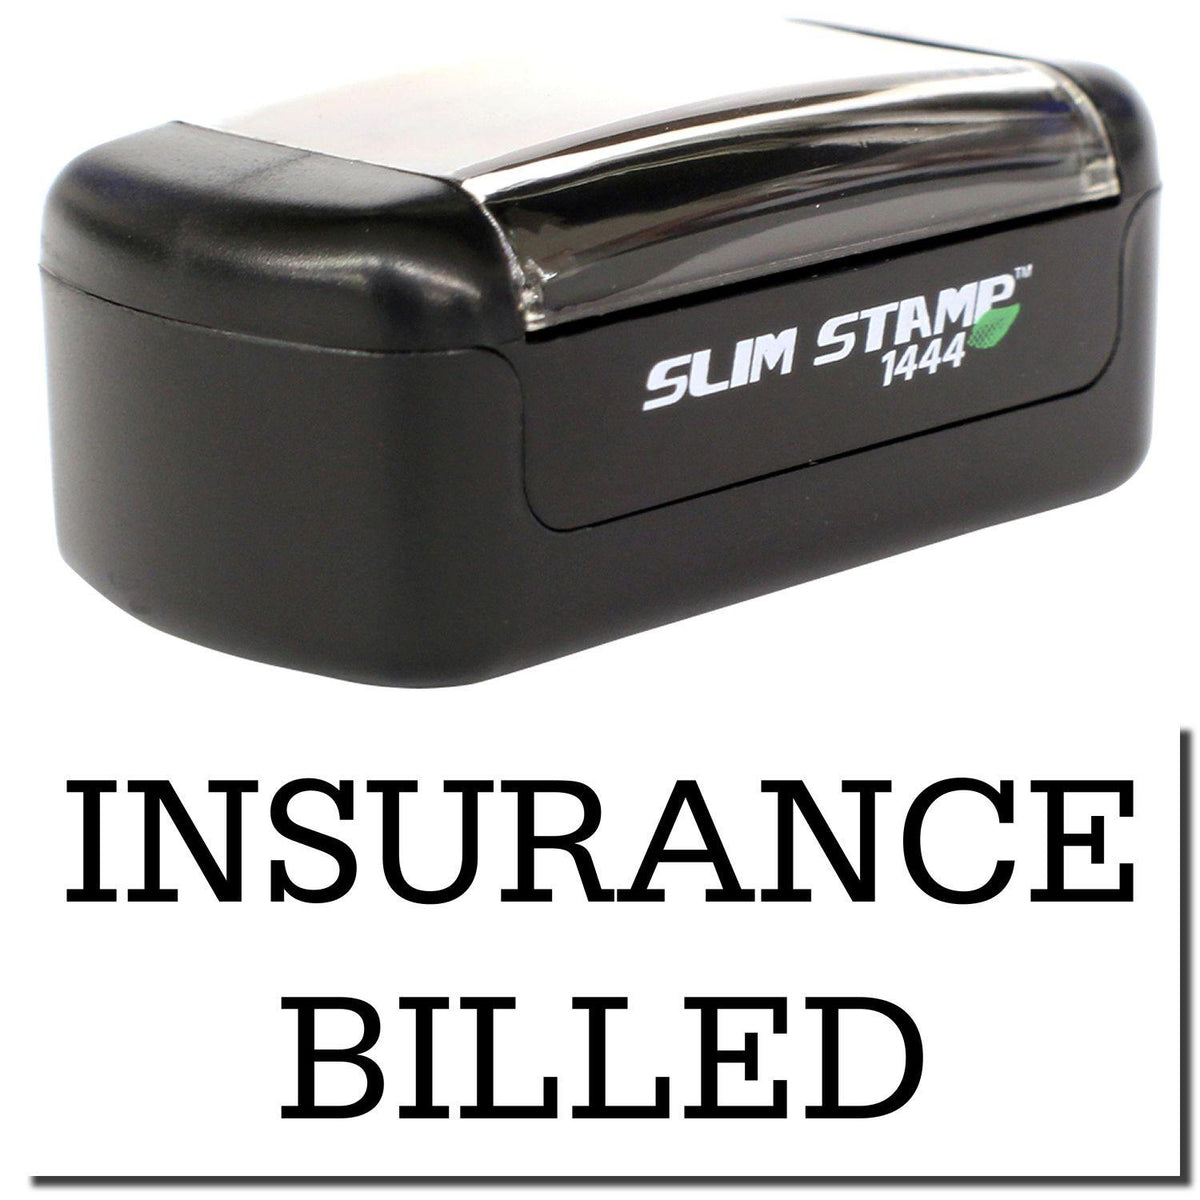 A stock office pre-inked stamp with a stamped image showing how the text &quot;INSURANCE BILLED&quot; is displayed after stamping.